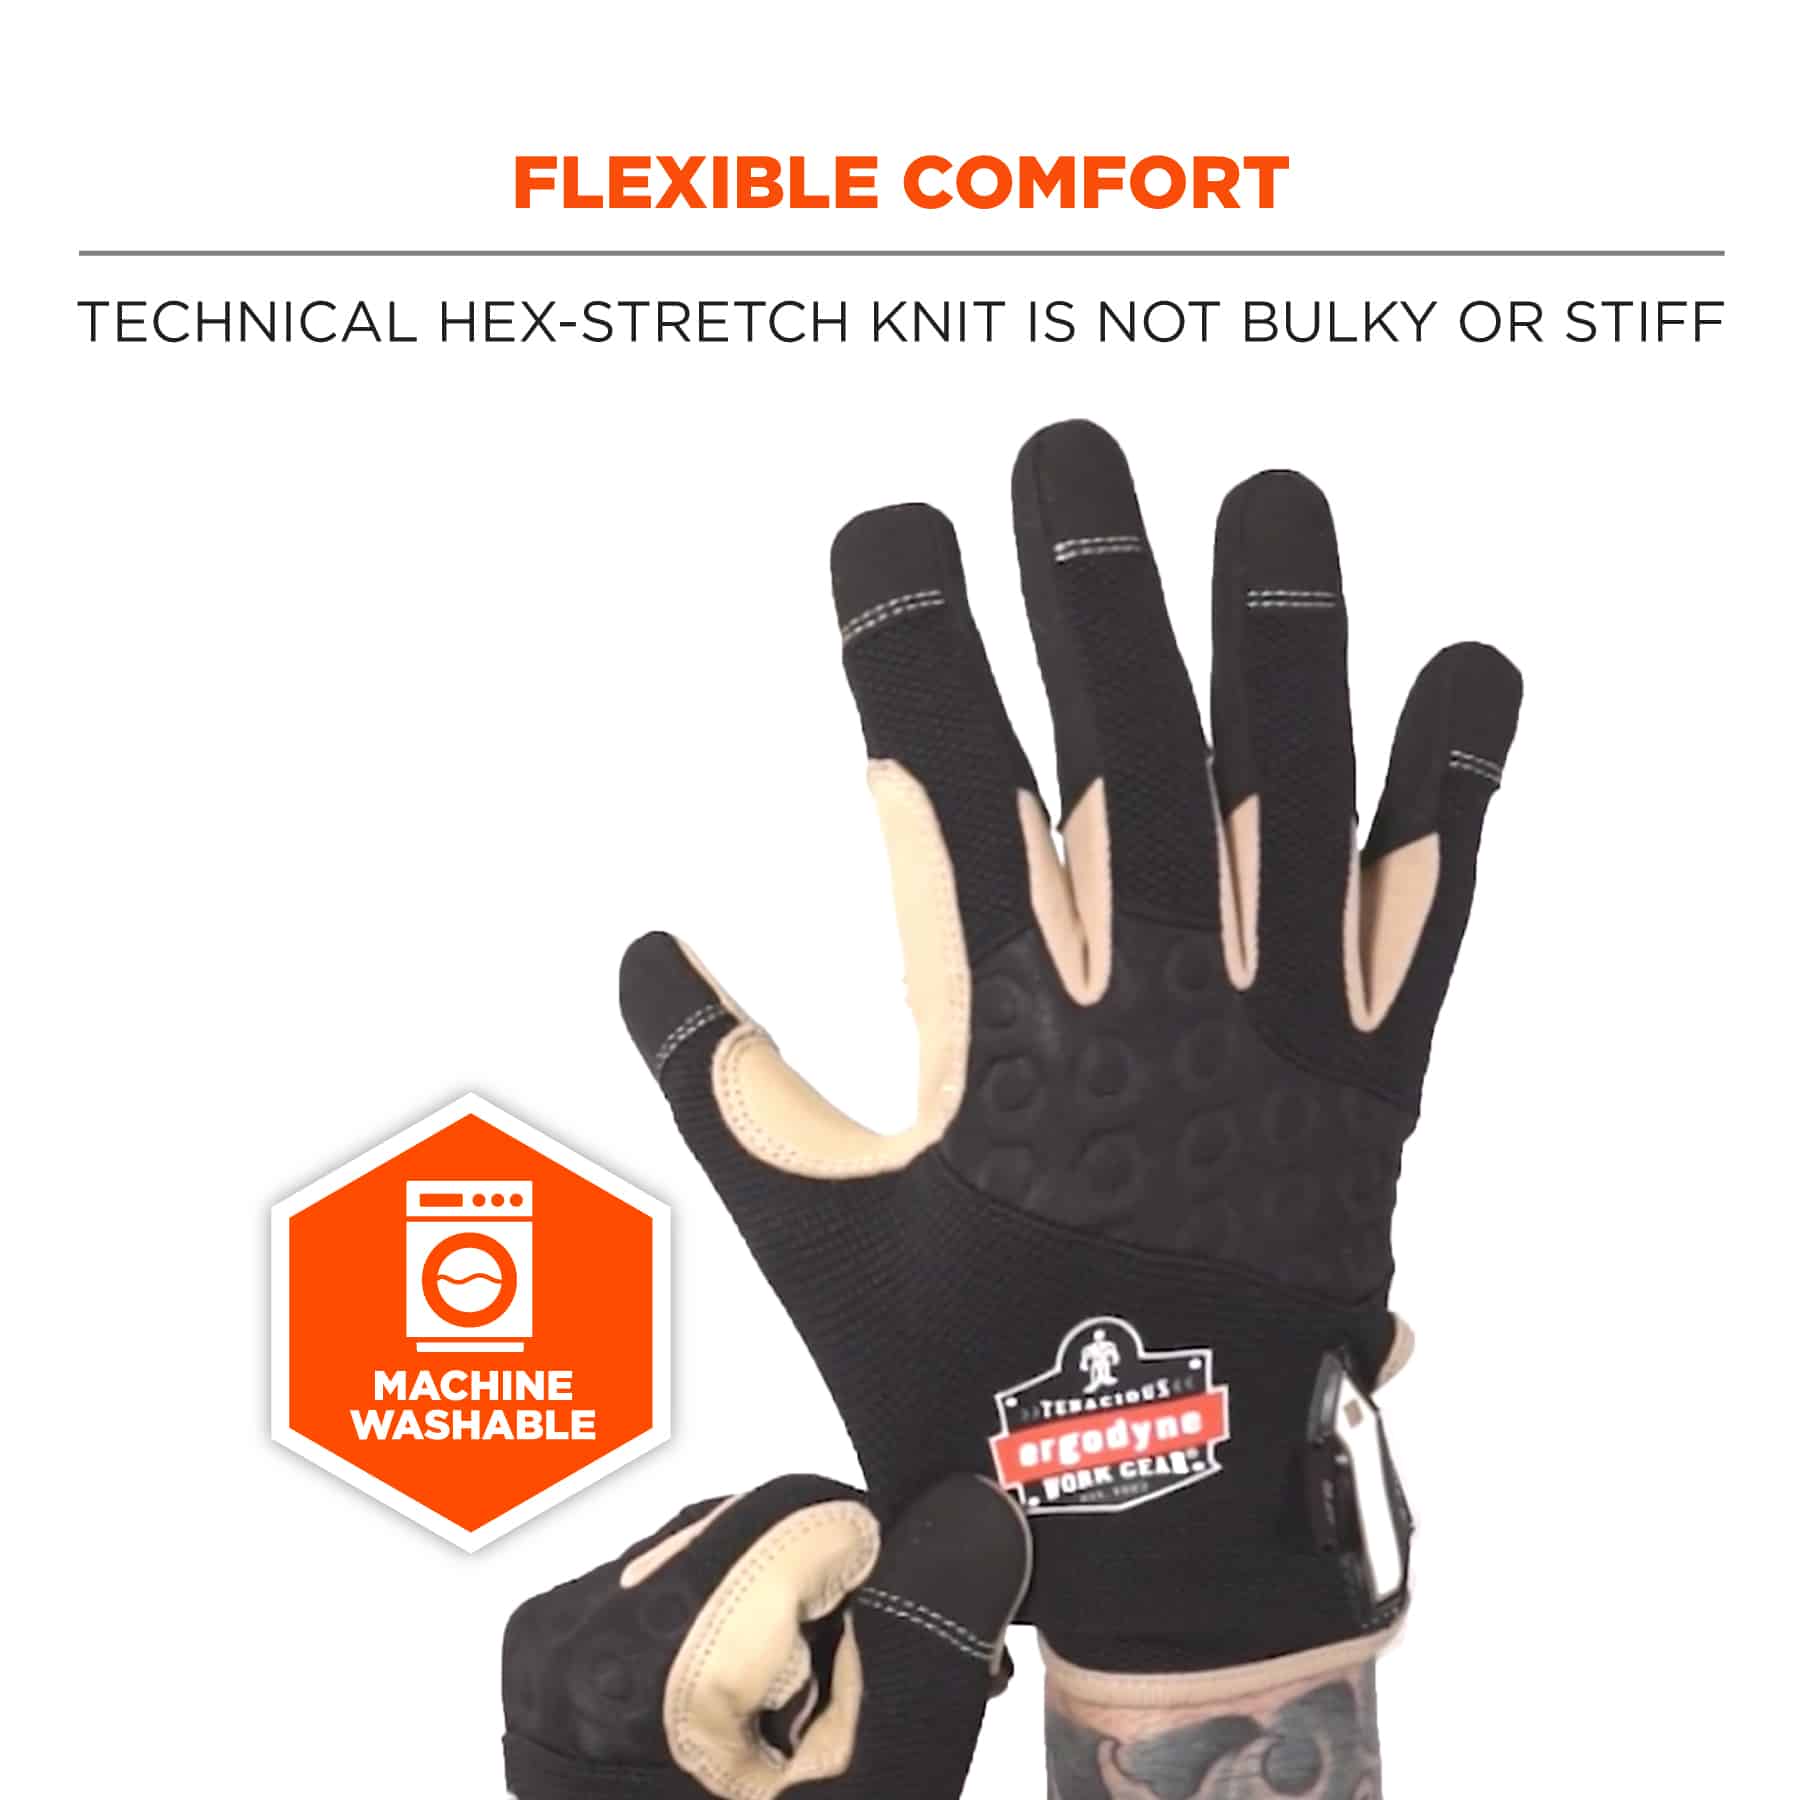 BEETRO Working Gloves For Heavy Duty Mesh Design Comfort Fit and Breathable 1 Pair Garden Yard Working Driver Gloves Cowhide Leather Scratch Resistance 